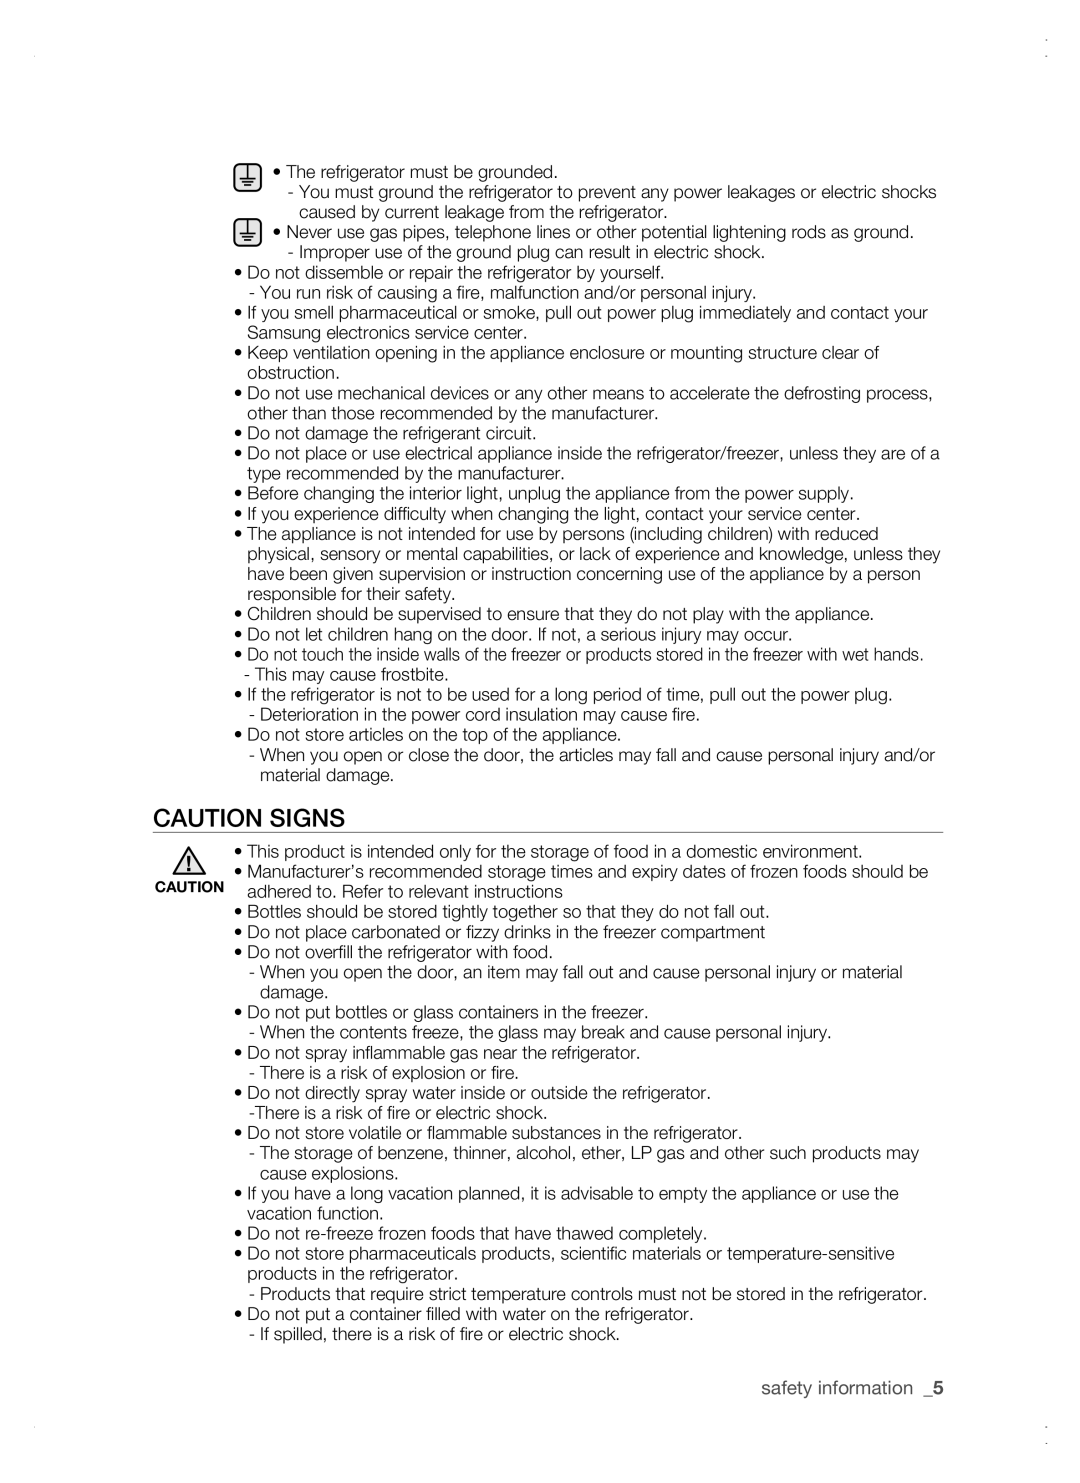 Samsung RSG5 user manual Caution Signs, safety information  